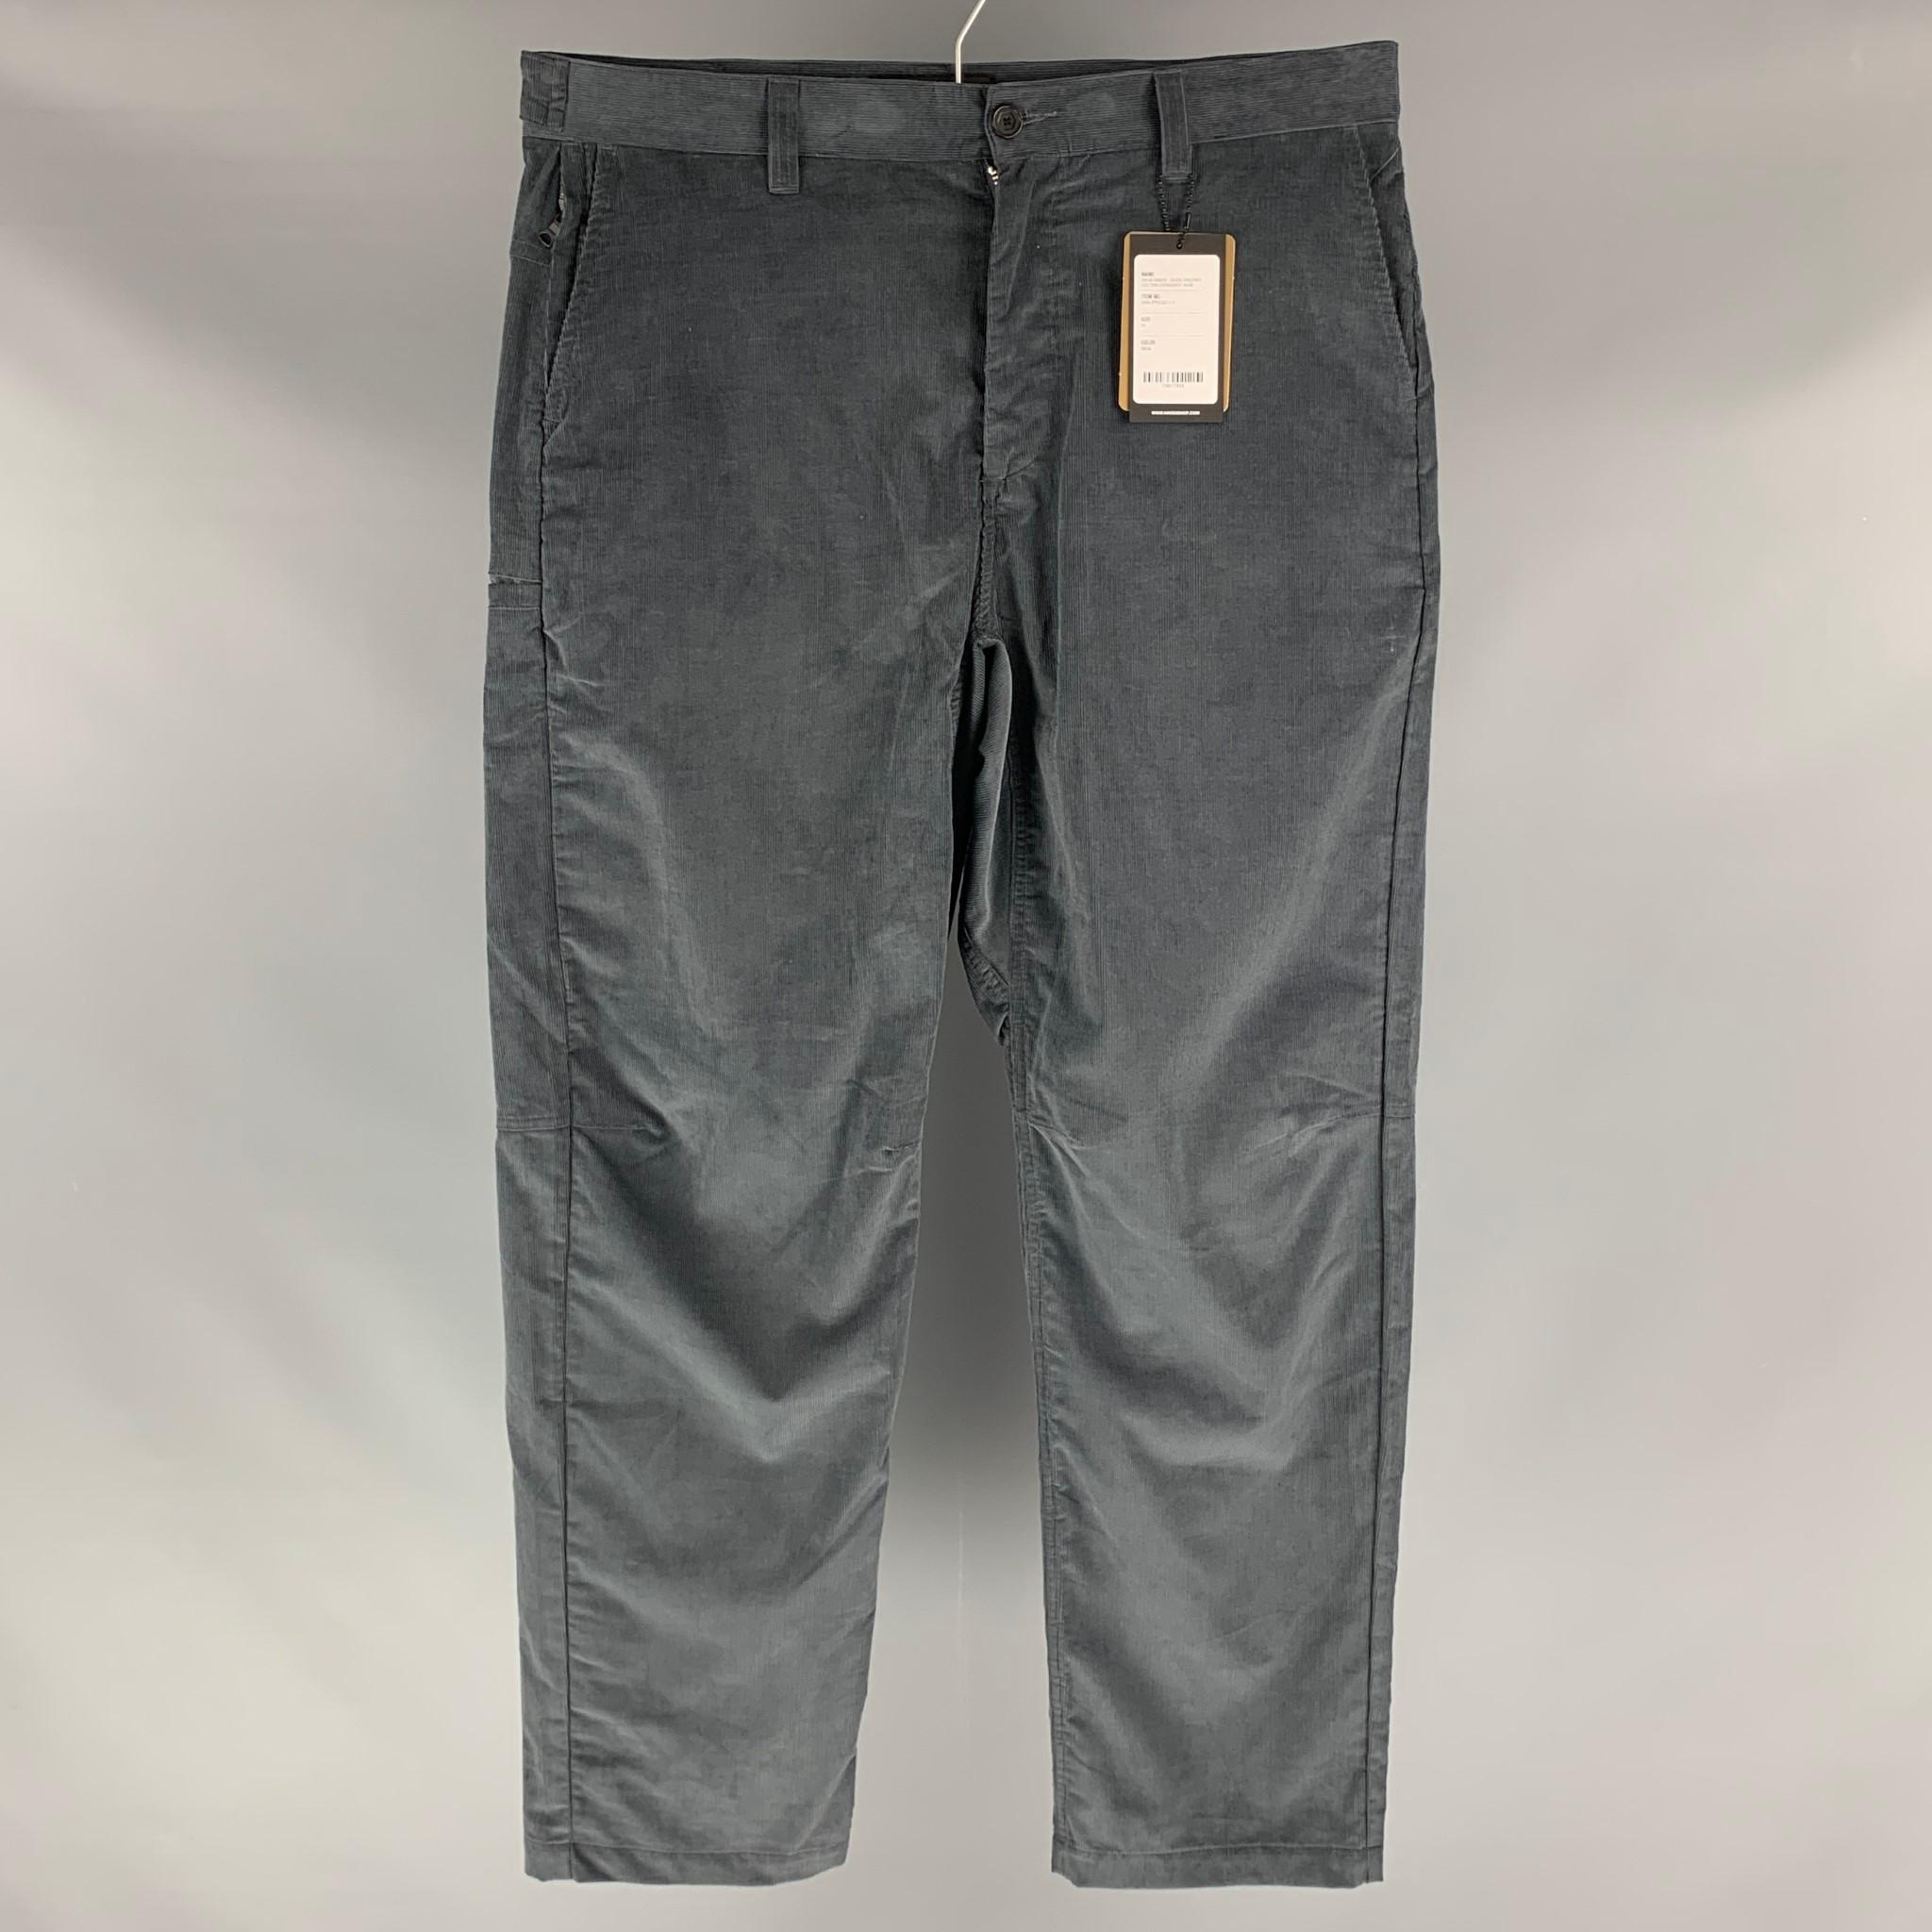 HAVEN 'Opus Pants' casual pants comes in a grey cotton corduroy fabric featuring a slate style, a zip up pocket, a lateral pocket, snap button detail at waistband and a button fly closure. Made in Canada.

New With Tags.
Marked: